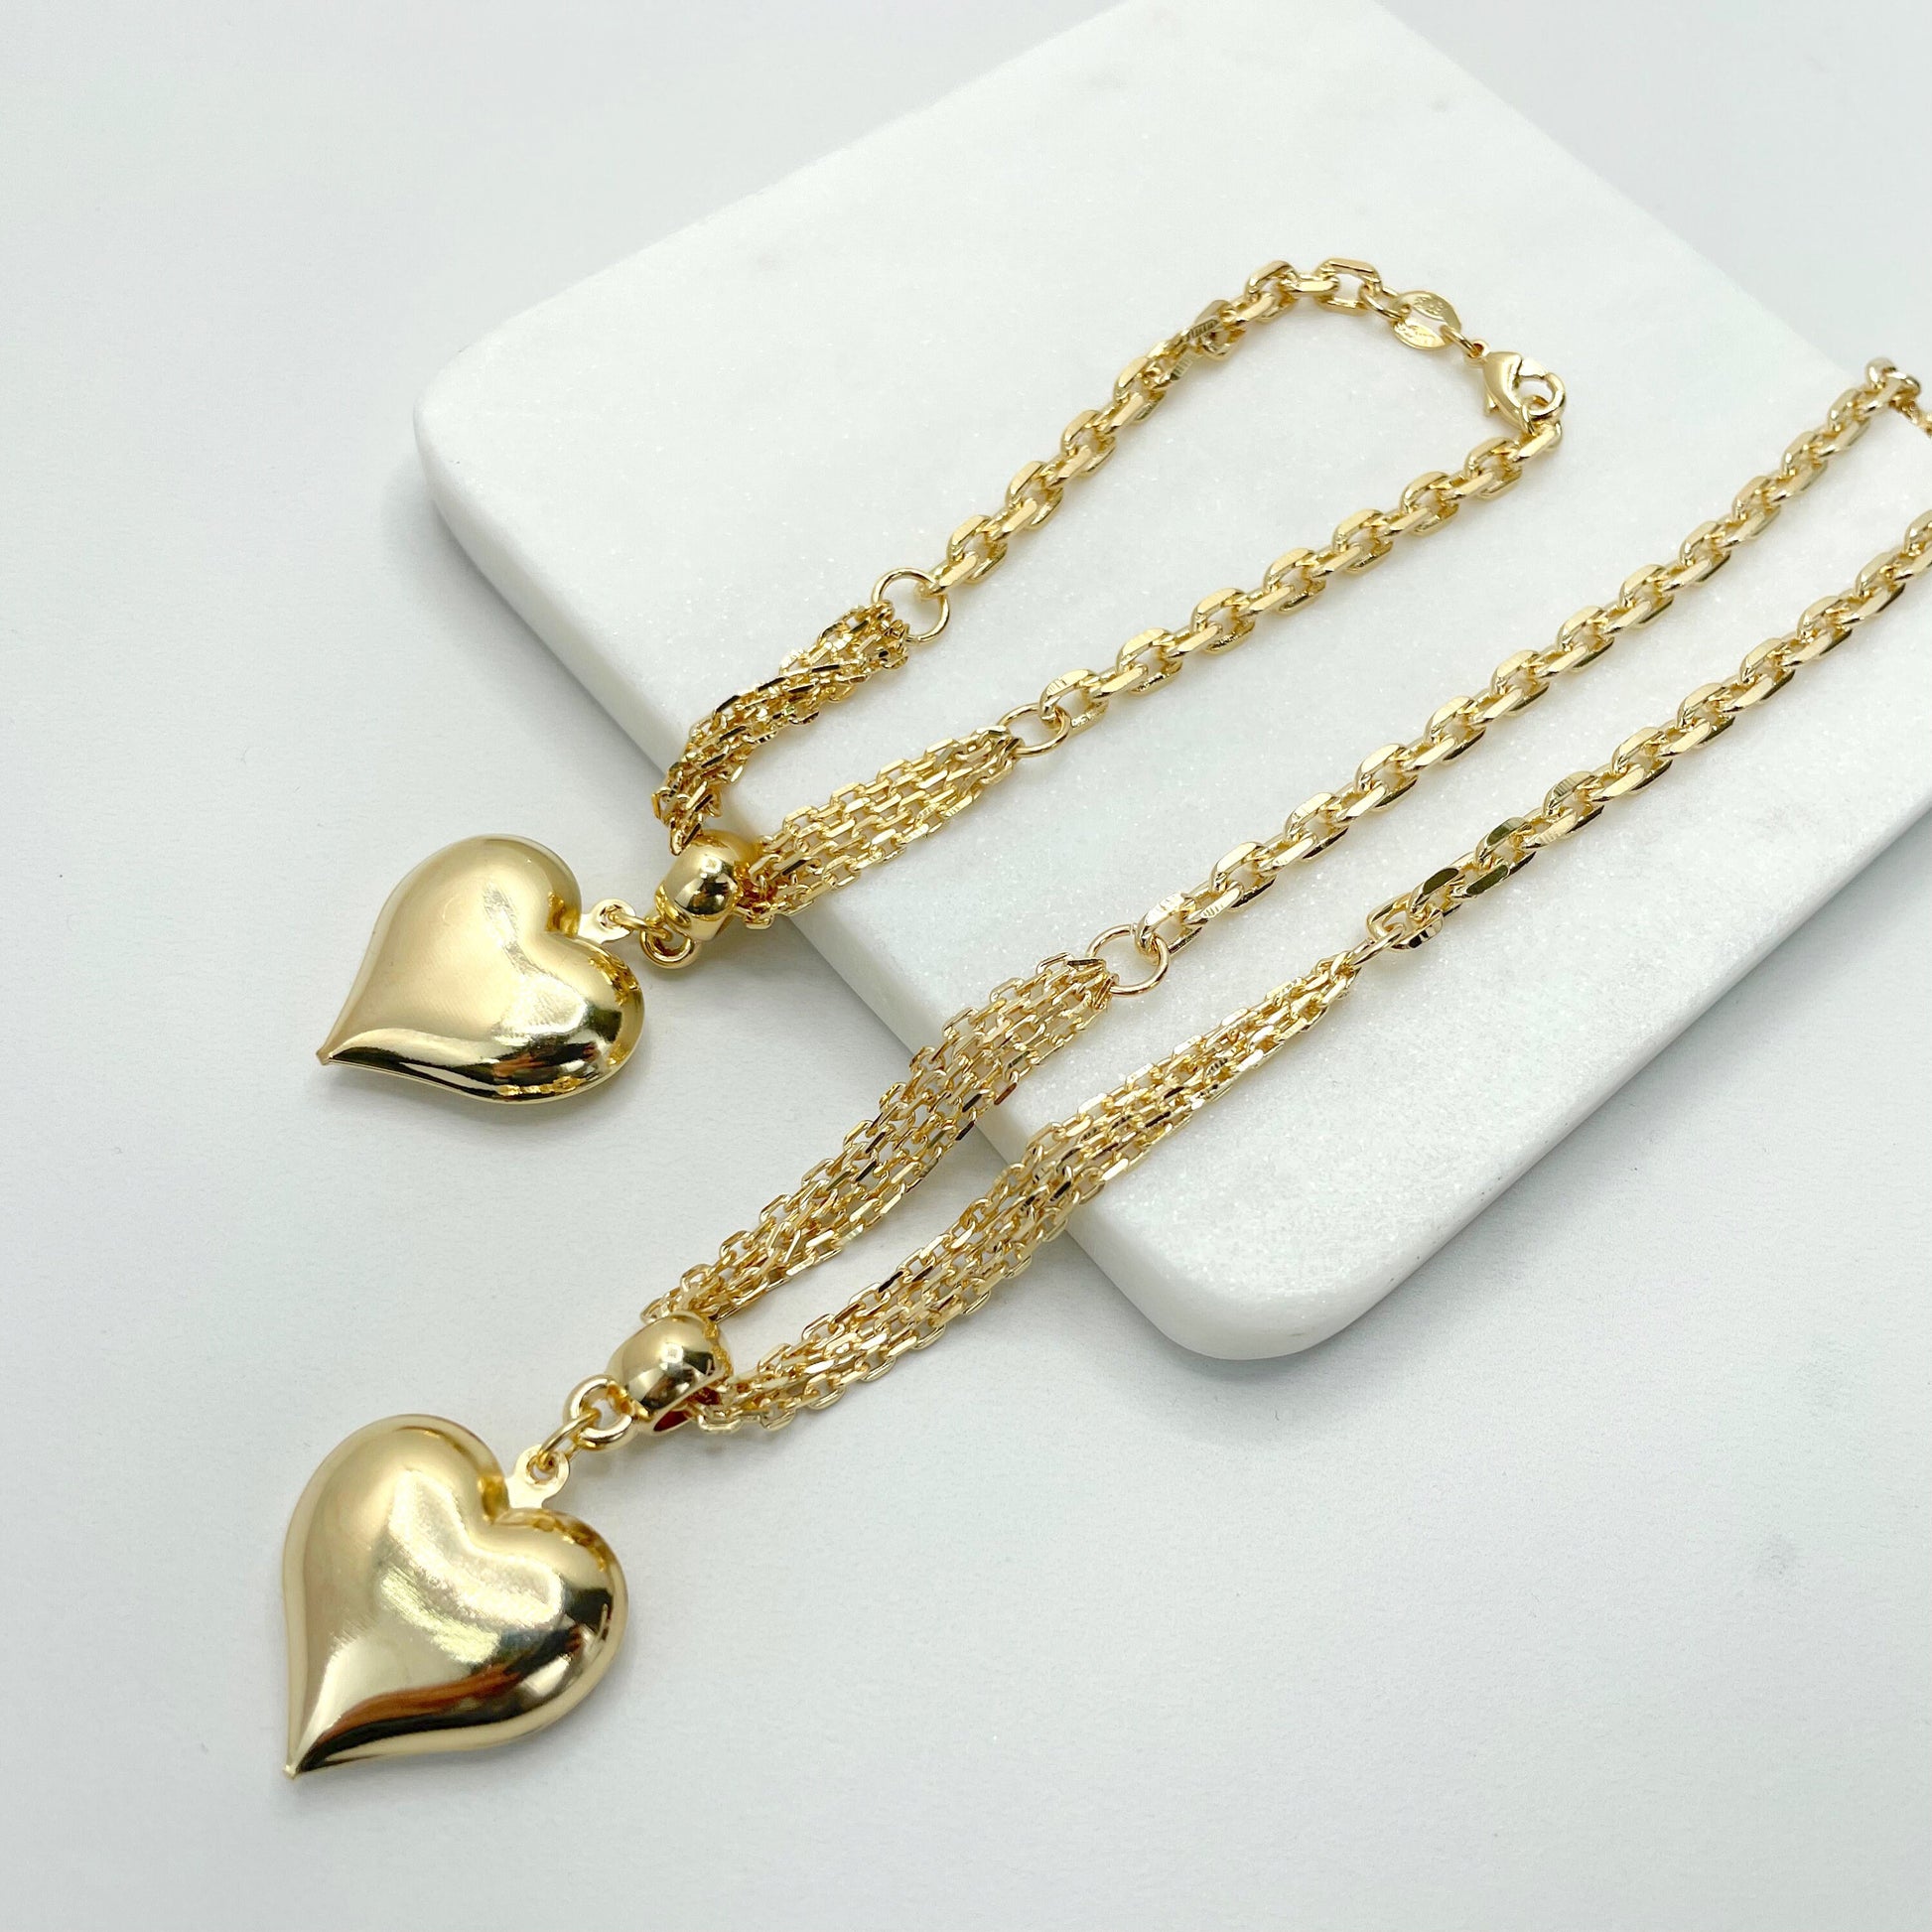 18k Gold Filled Bundle Paperclip Chains in 2mm and 4mm Necklace with Puffed 3D Hearts Charm or Bracelet, Wholesale Jewelry Making Supplies